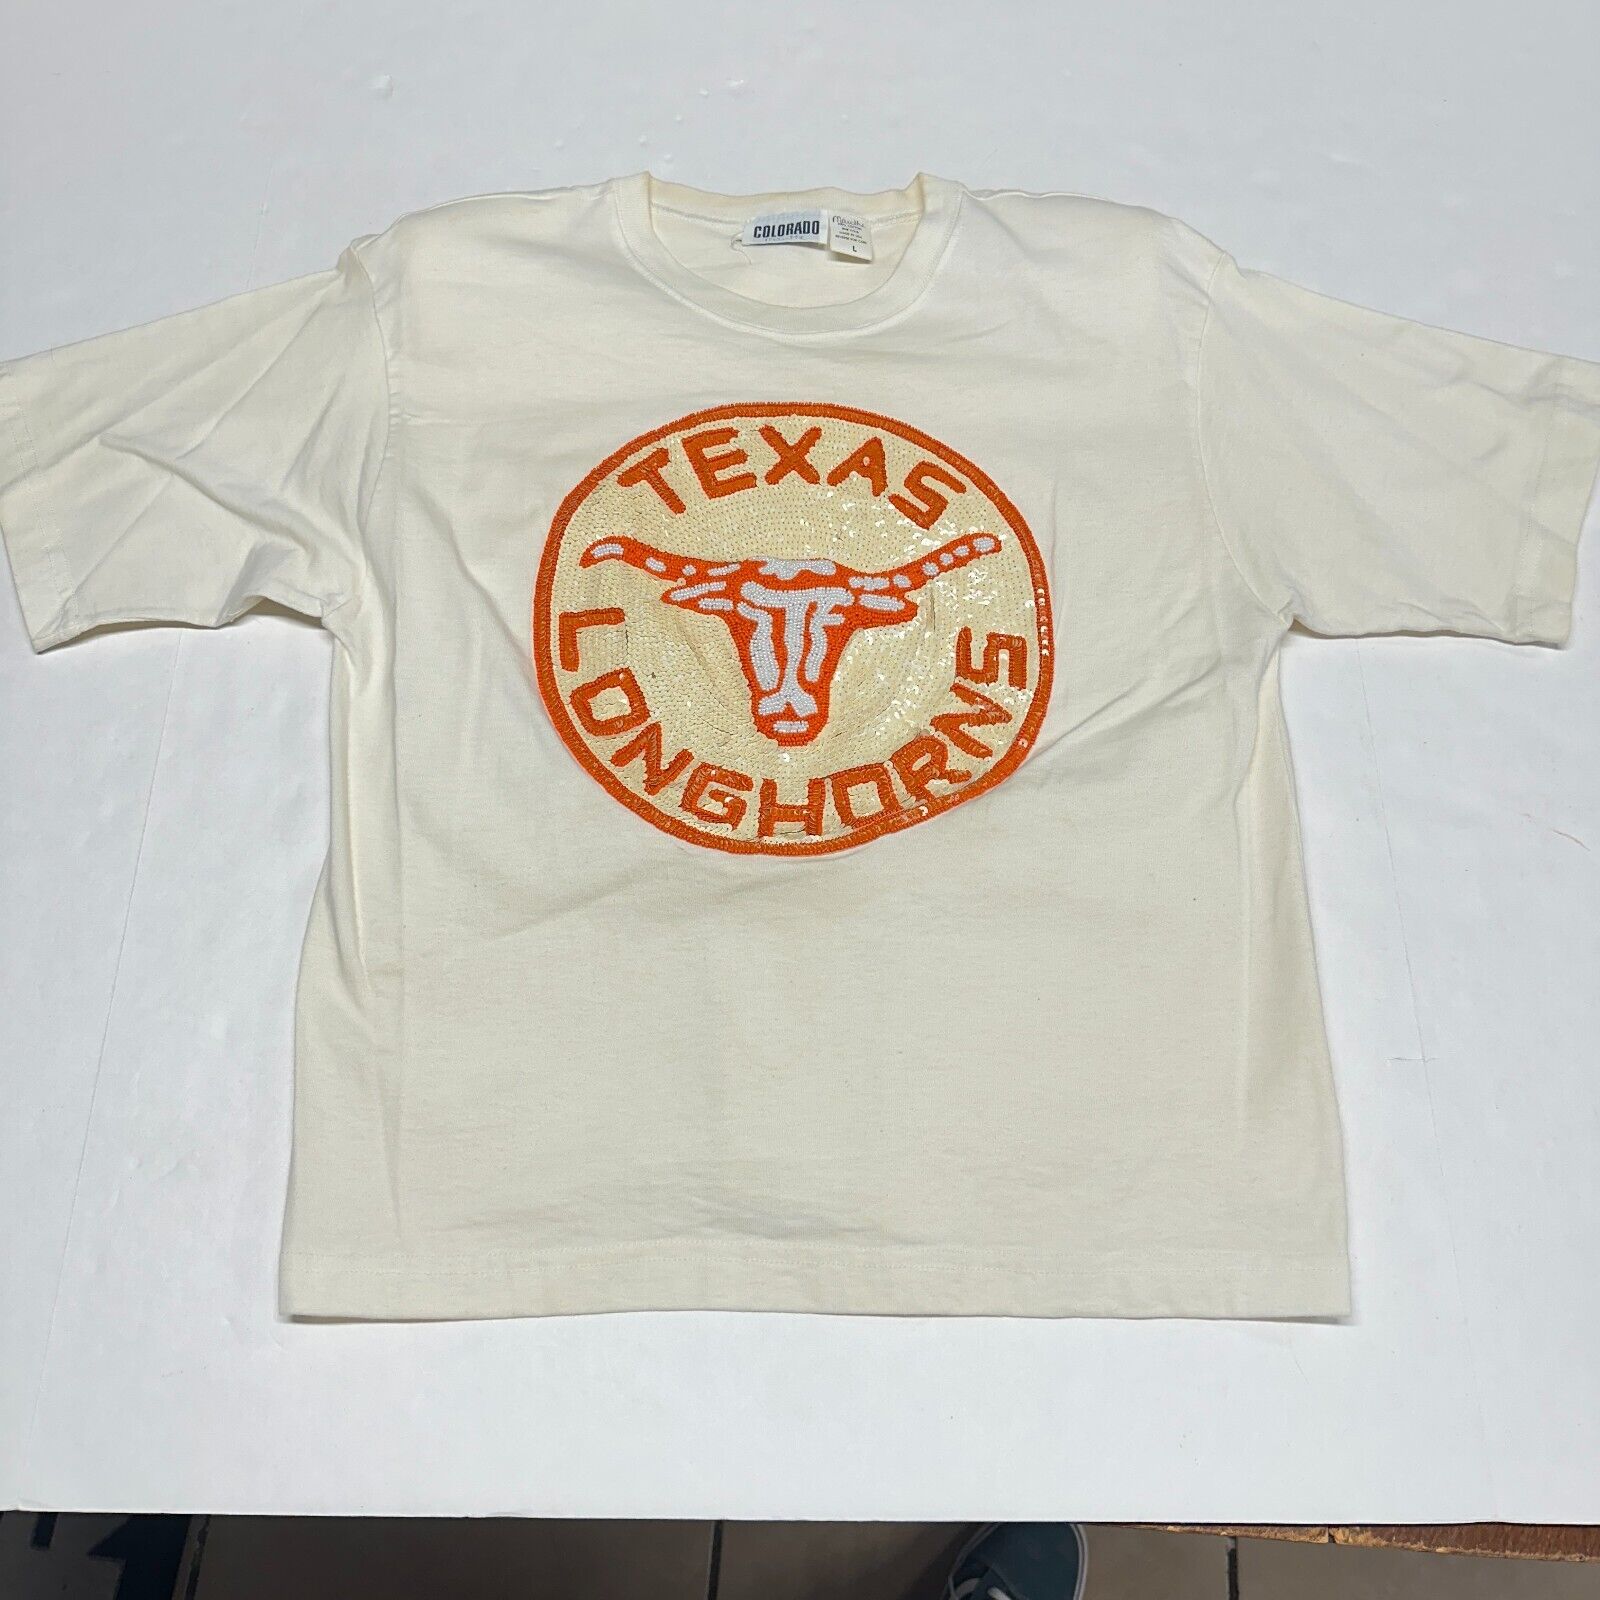 VTG NOS Texas Longhorns Short Sleeve Bedazzled T Shirt Size Large Made In US